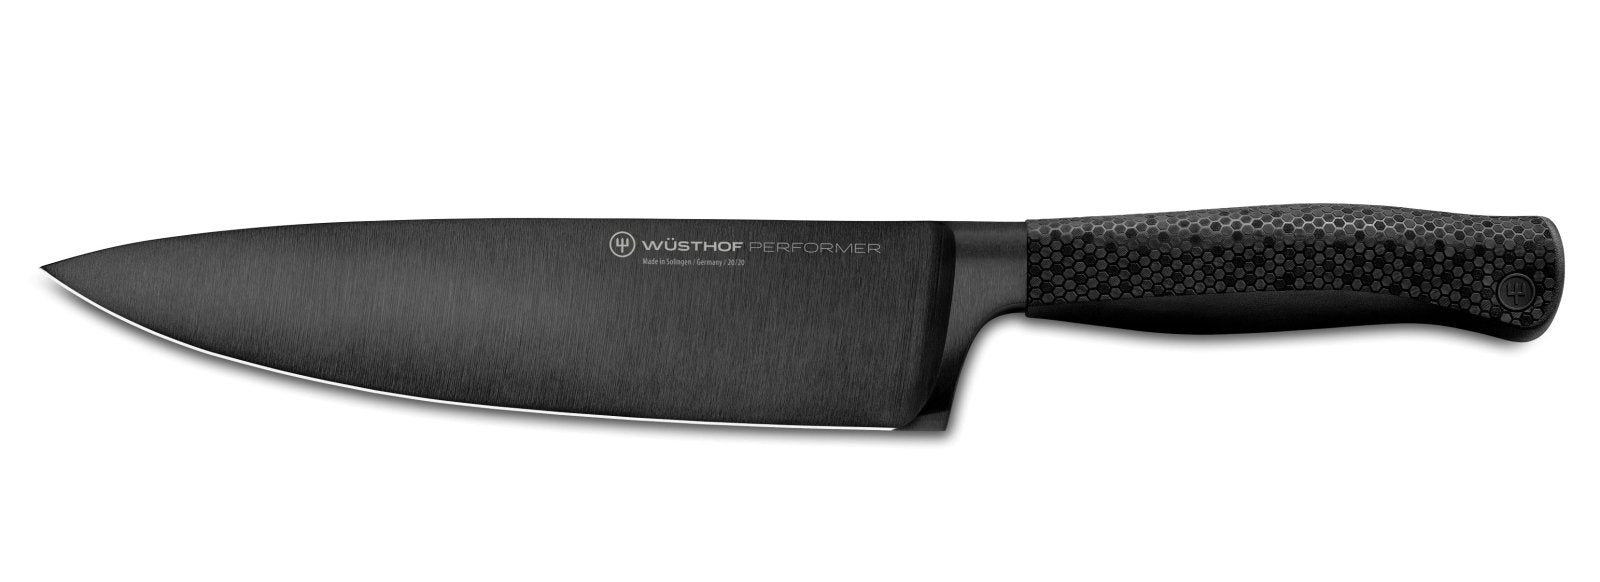 Wusthof Performer Cook's Knife 20cm - WT1061200120 - The Cotswold Knife Company